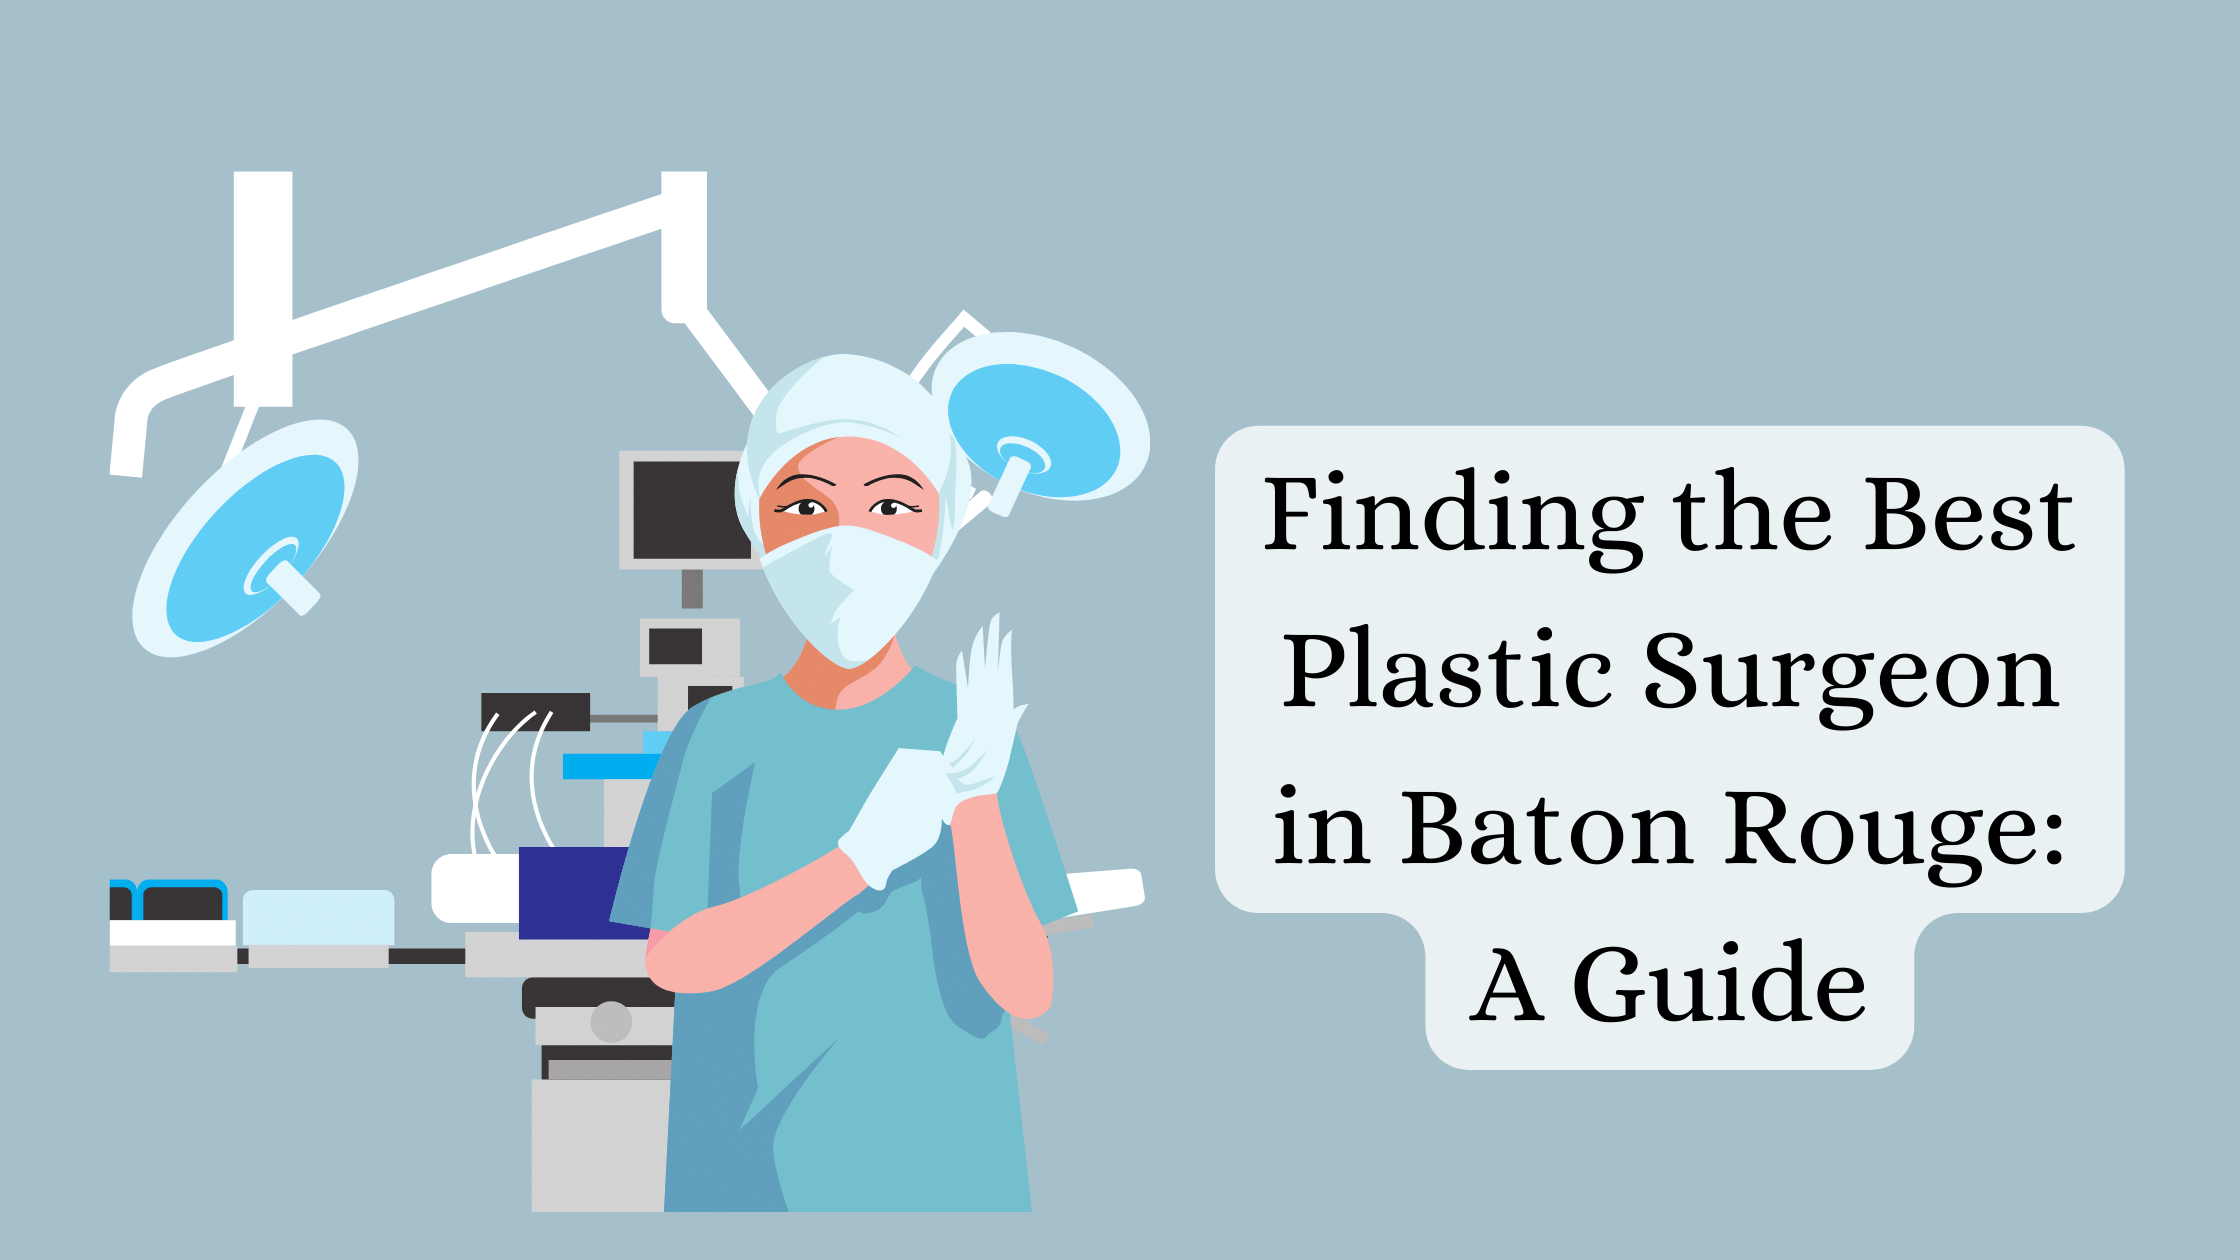 Finding the Best Plastic Surgeon